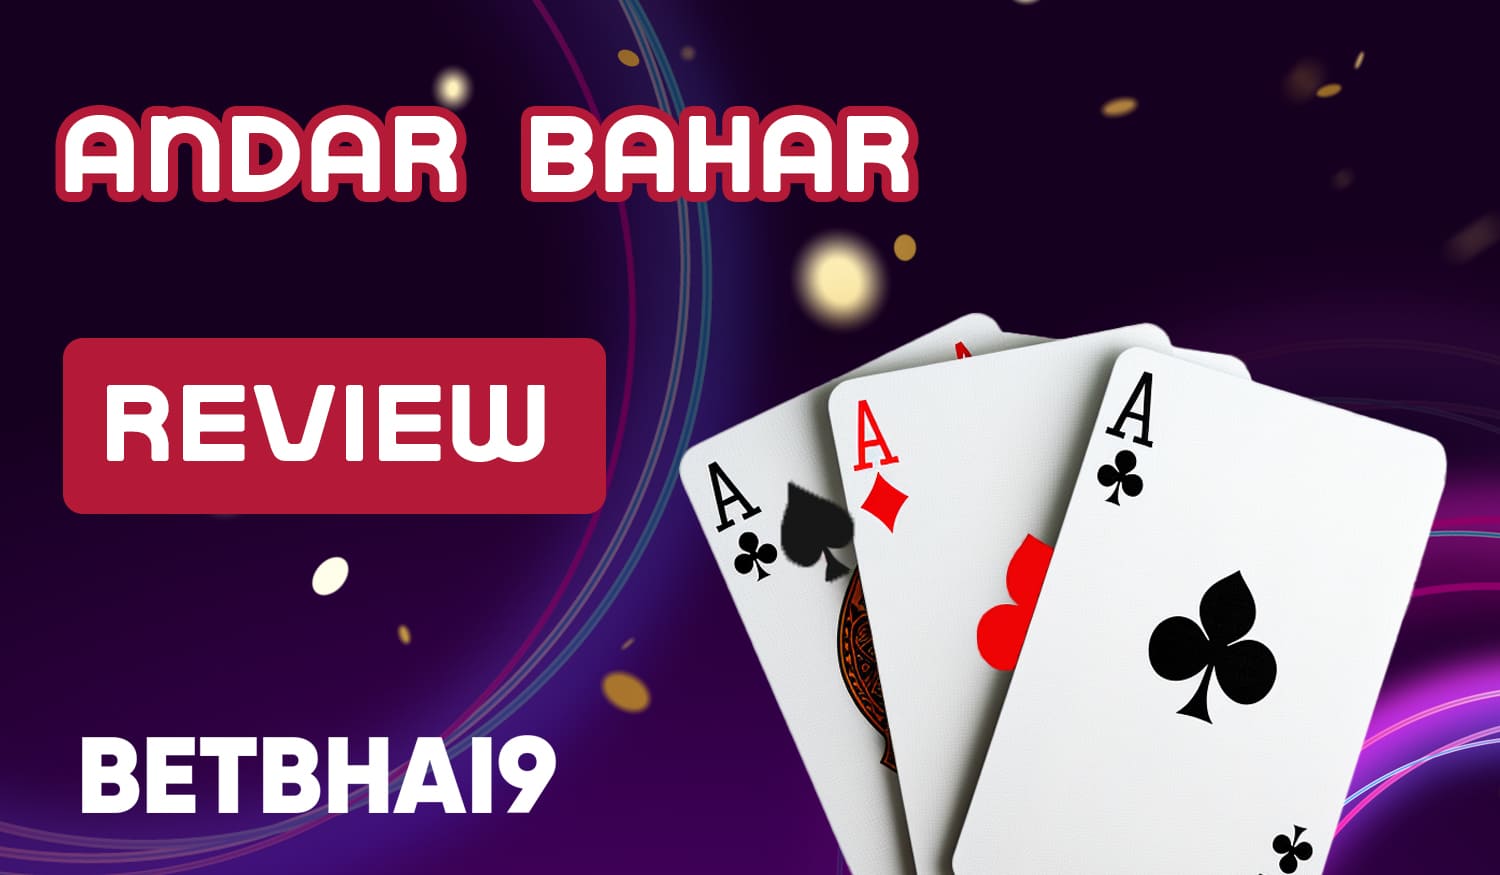 A detailed overview of the rules and demo mode of Andar Bahar at Betbhai9